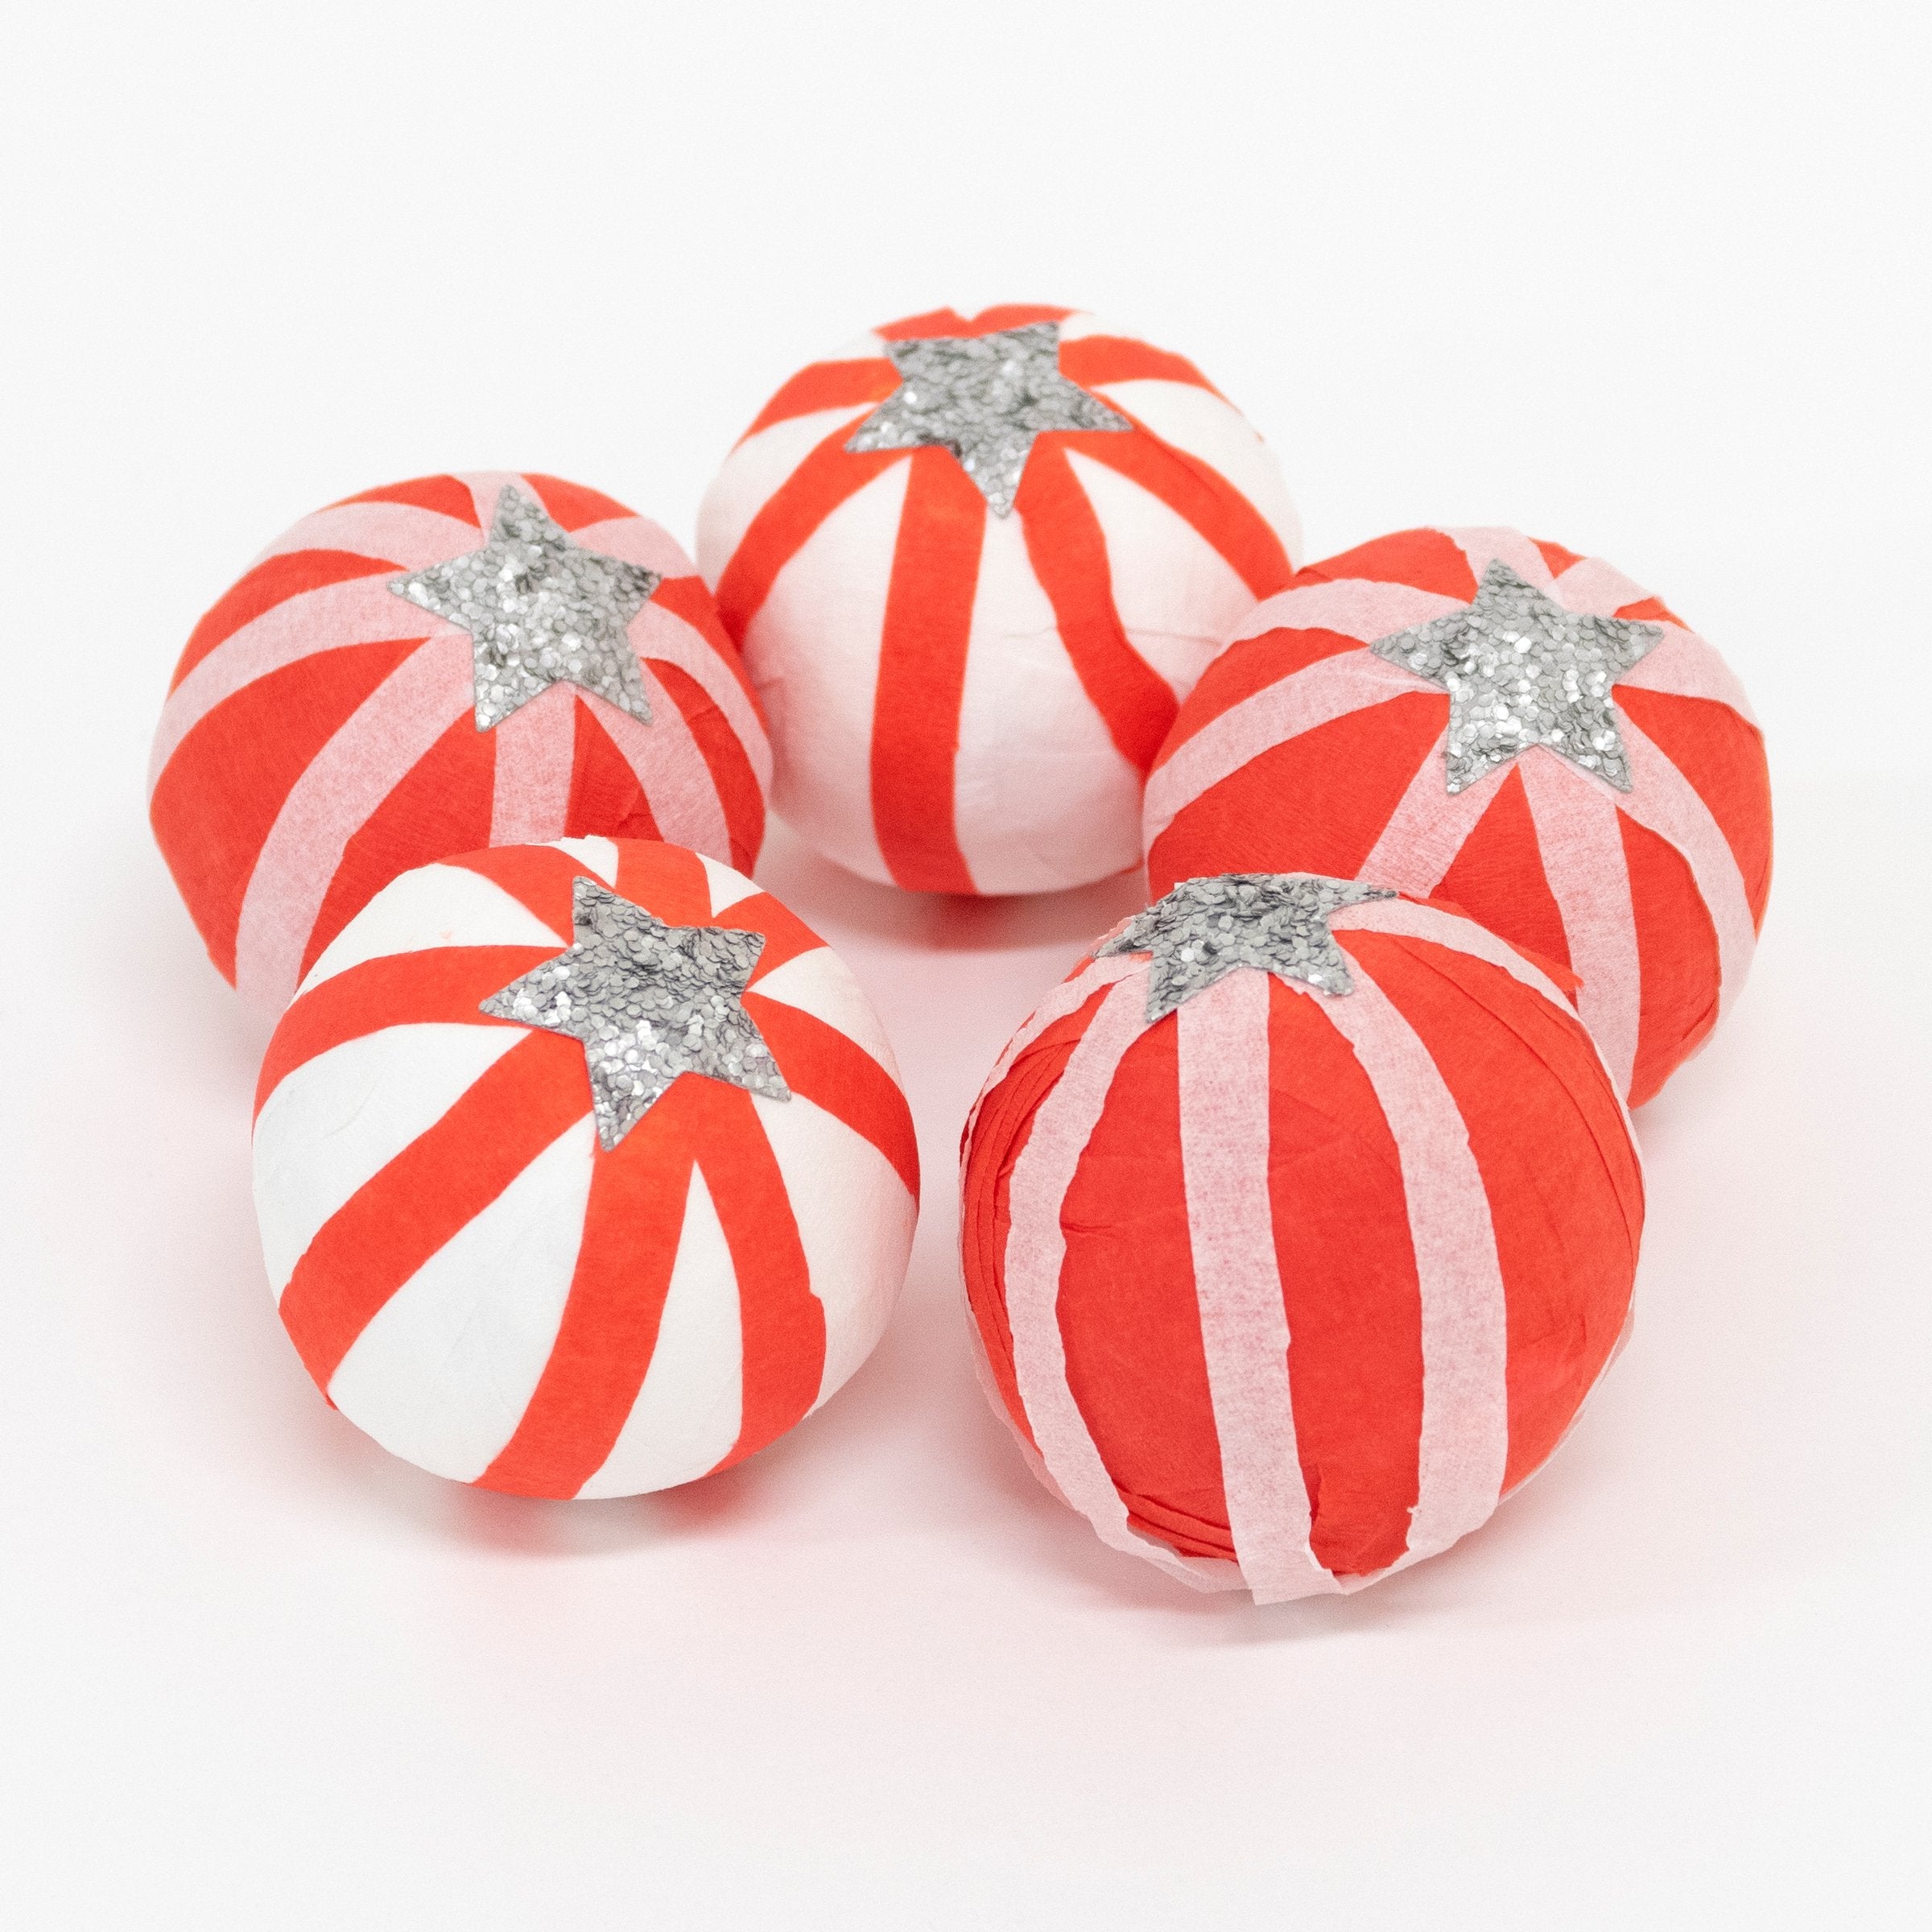 Our Christmas surprise balls are fabulous gifts for party guests.